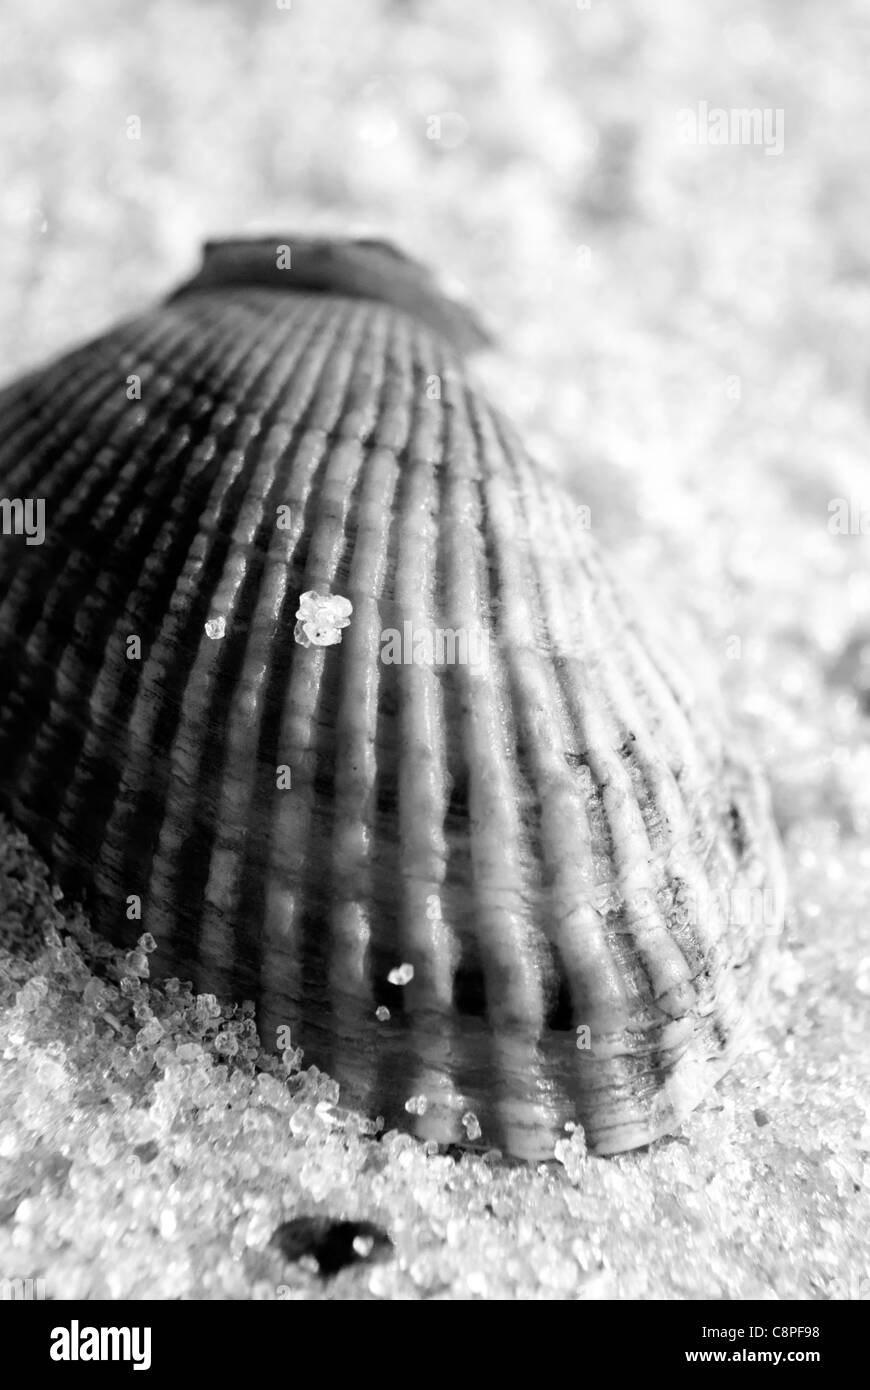 Full frame black and white of a shell on the beach Stock Photo